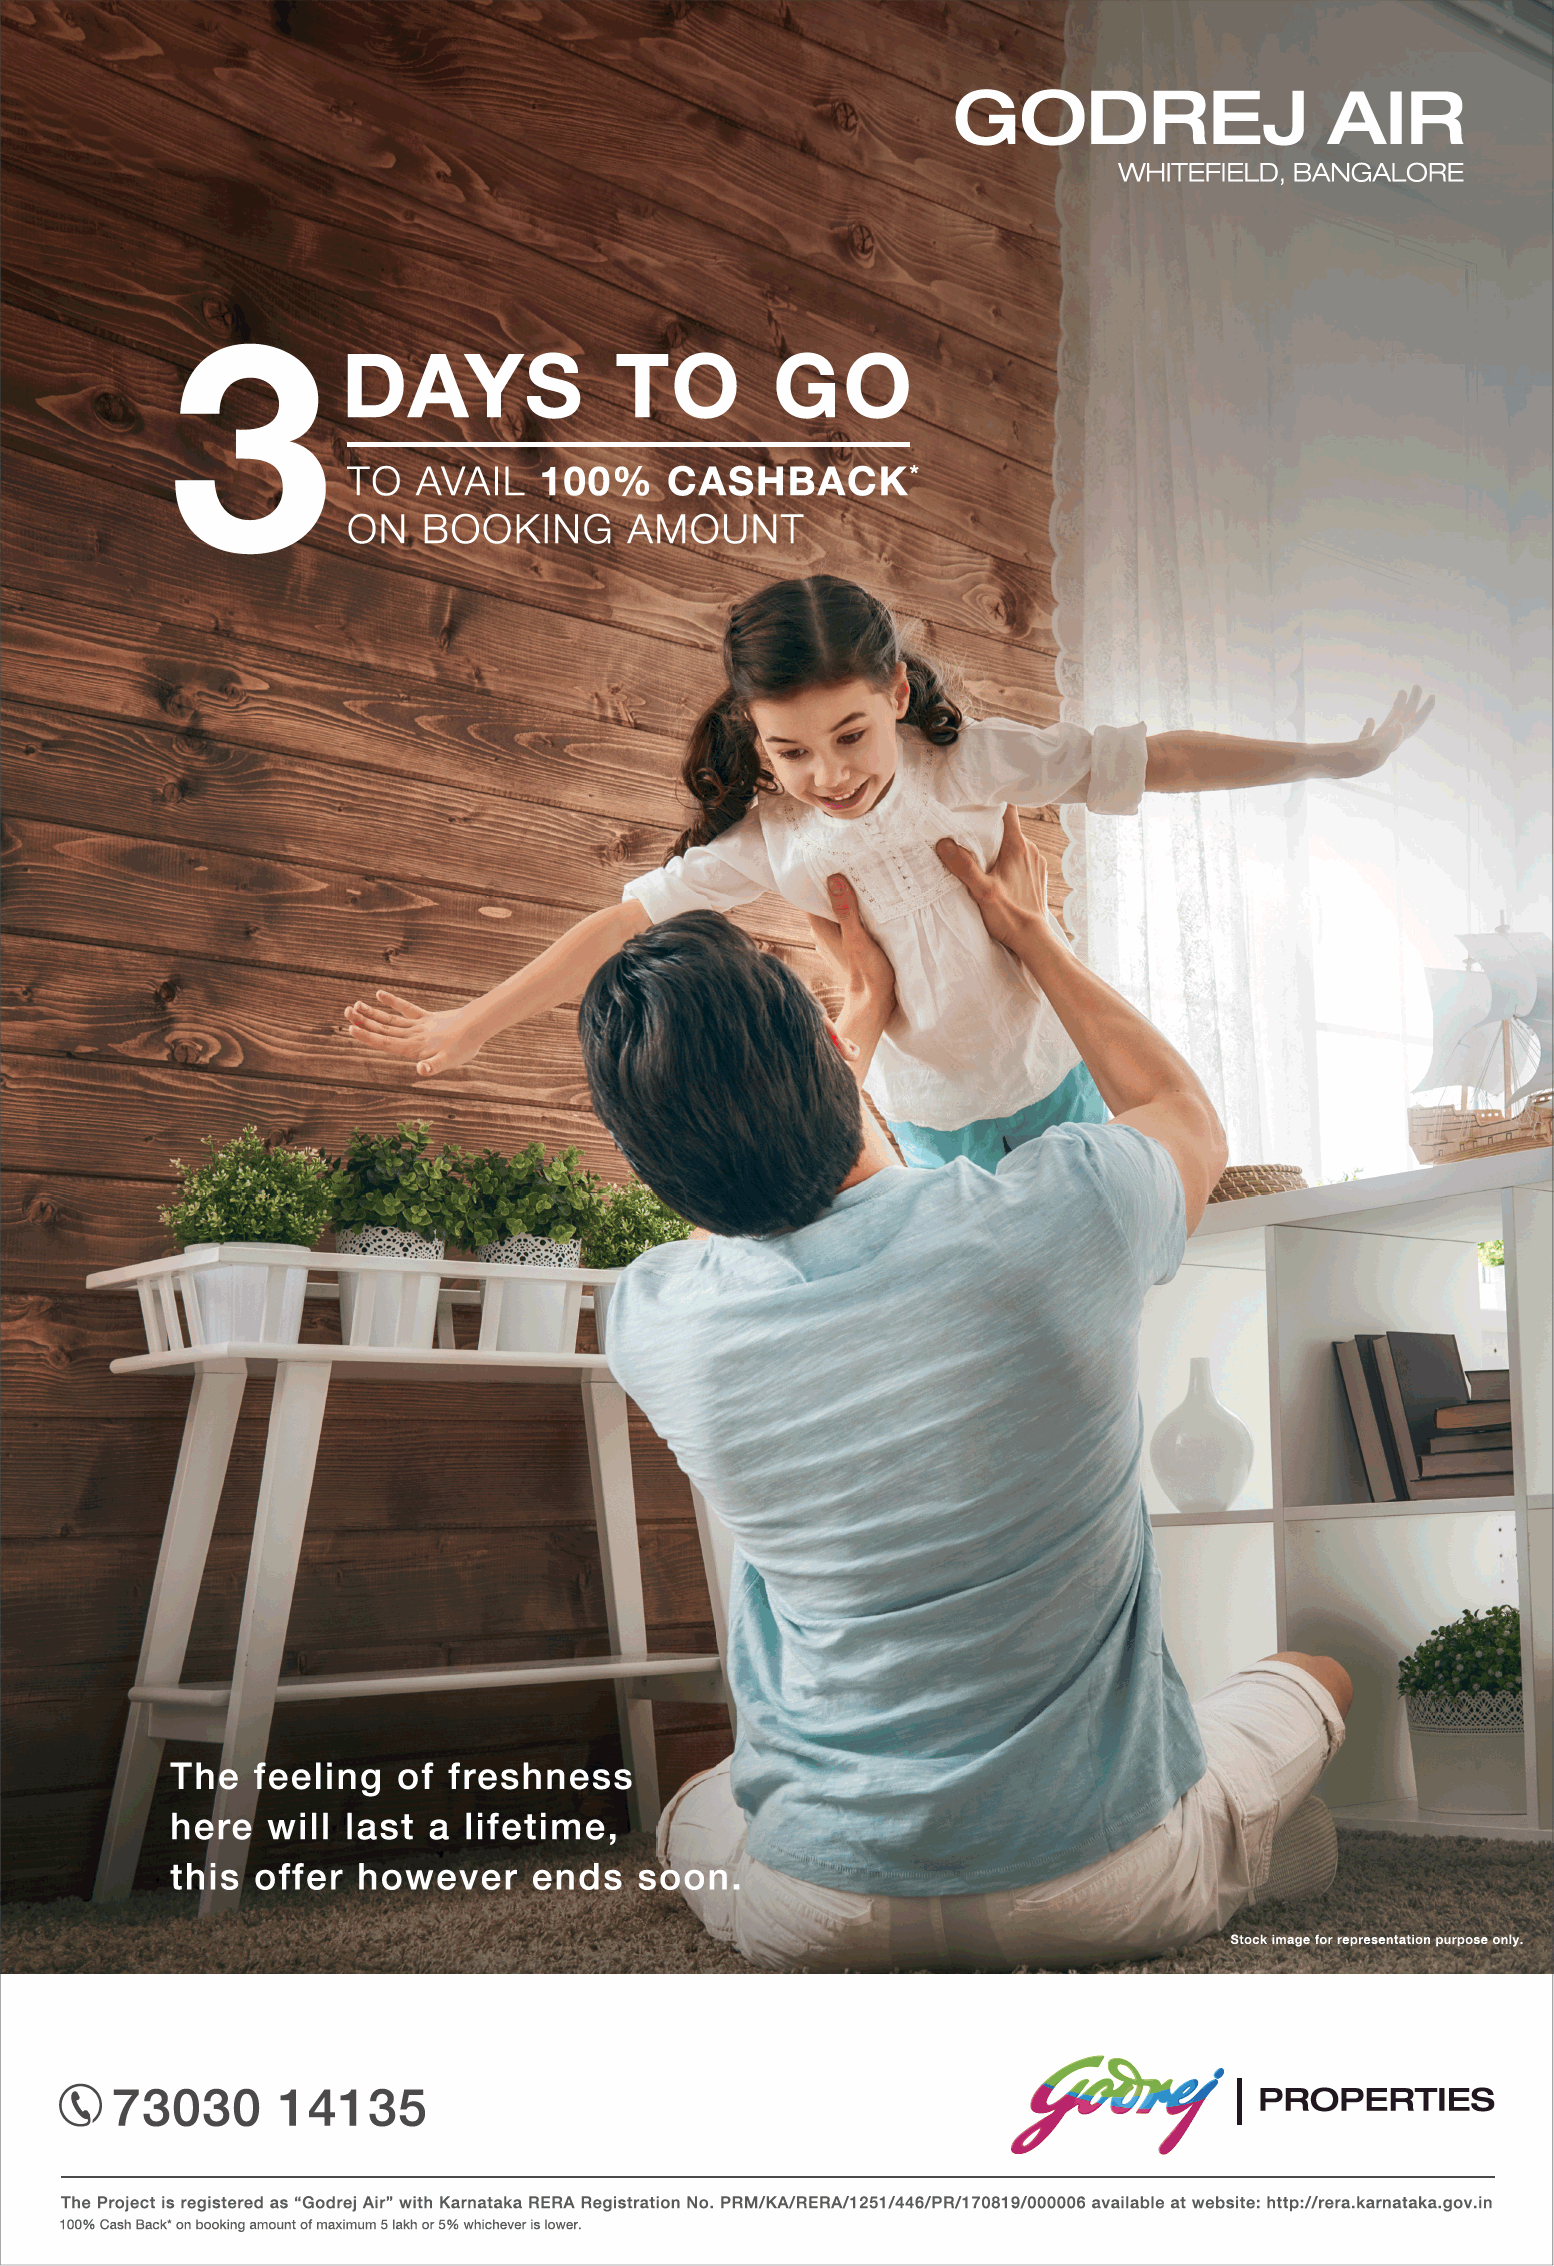 godrej-properties-godrej-air-3-days-to-go-to-avail-100%-cashback-ad-times-of-india-bangalore-29-03-2019.png